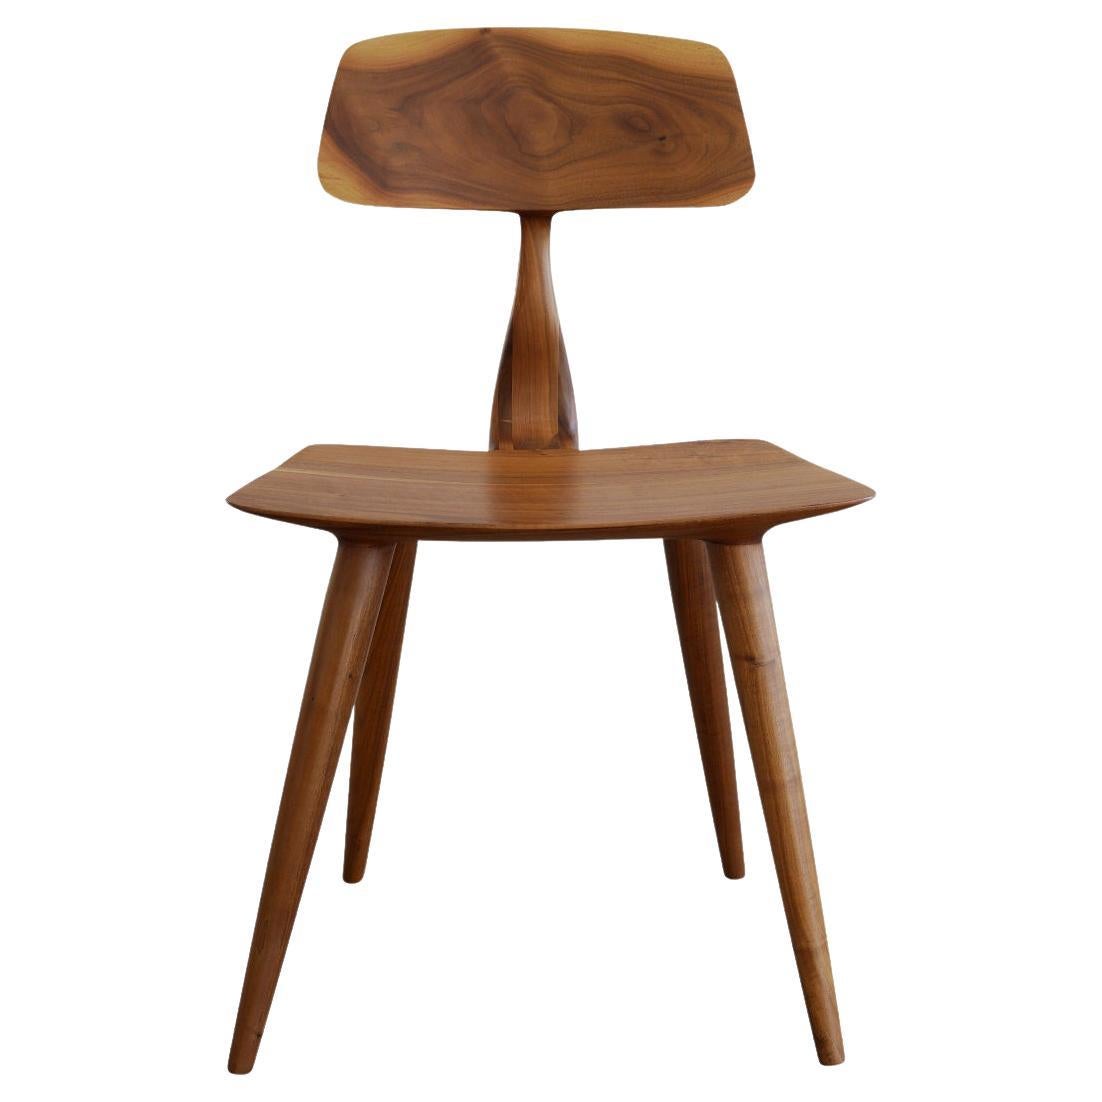 Mantaray Chair in Walnut Wood, Hand-Sculpted Dining Chair by Kokora For Sale